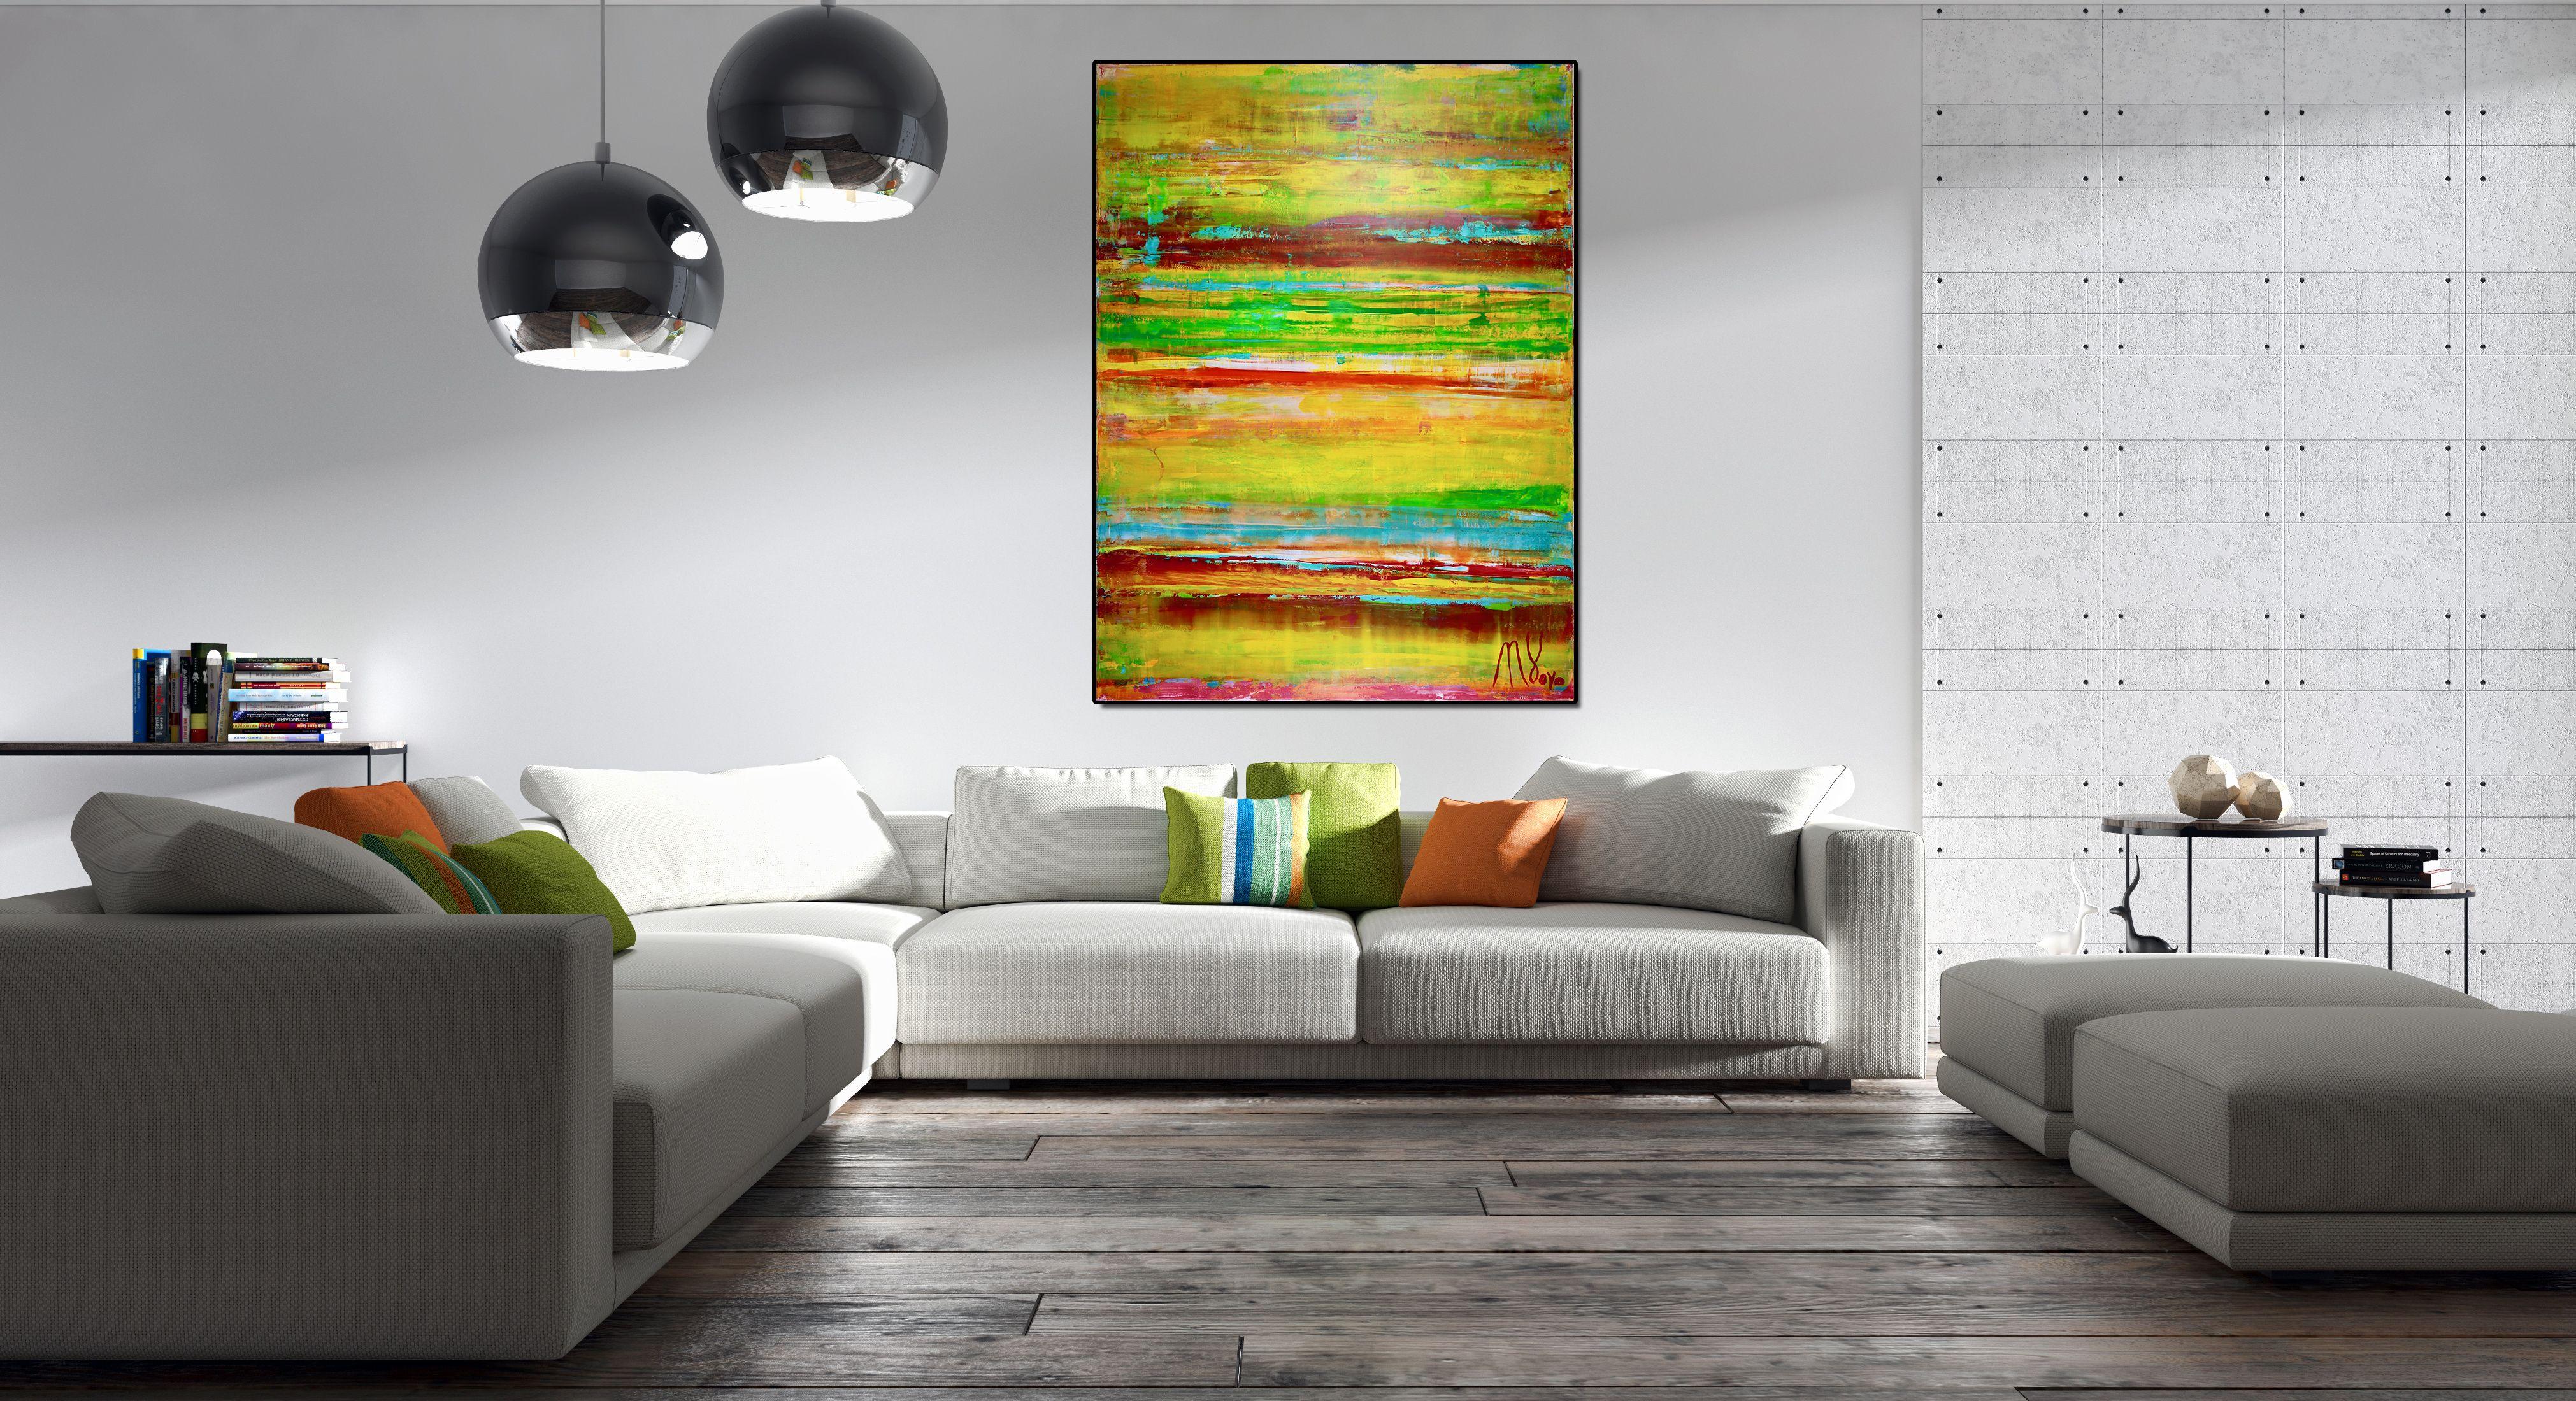 - BOLD STATEMENT WORK  - SIGNED   - SIGNED CERTIFICATE OF AUTHENTICITY  - READY TO HANG    This colorfield painting is all about texture and contemplation. Very layered with plaster over gesso and using palette knives to create rich texture.